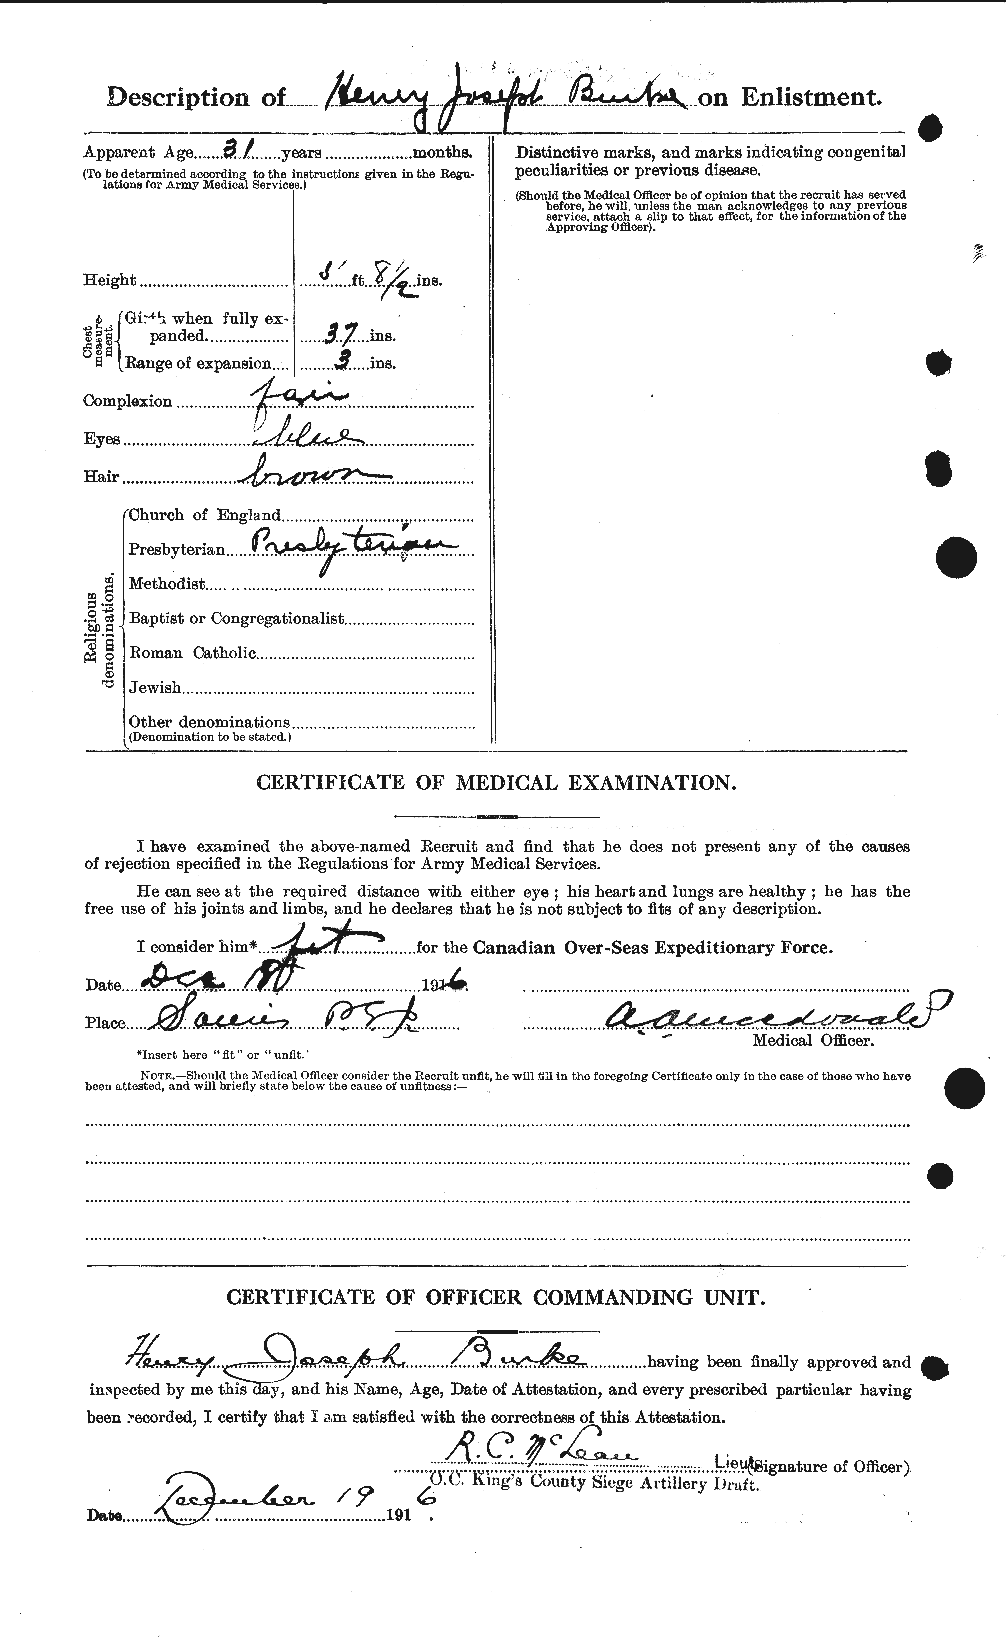 Personnel Records of the First World War - CEF 272892b